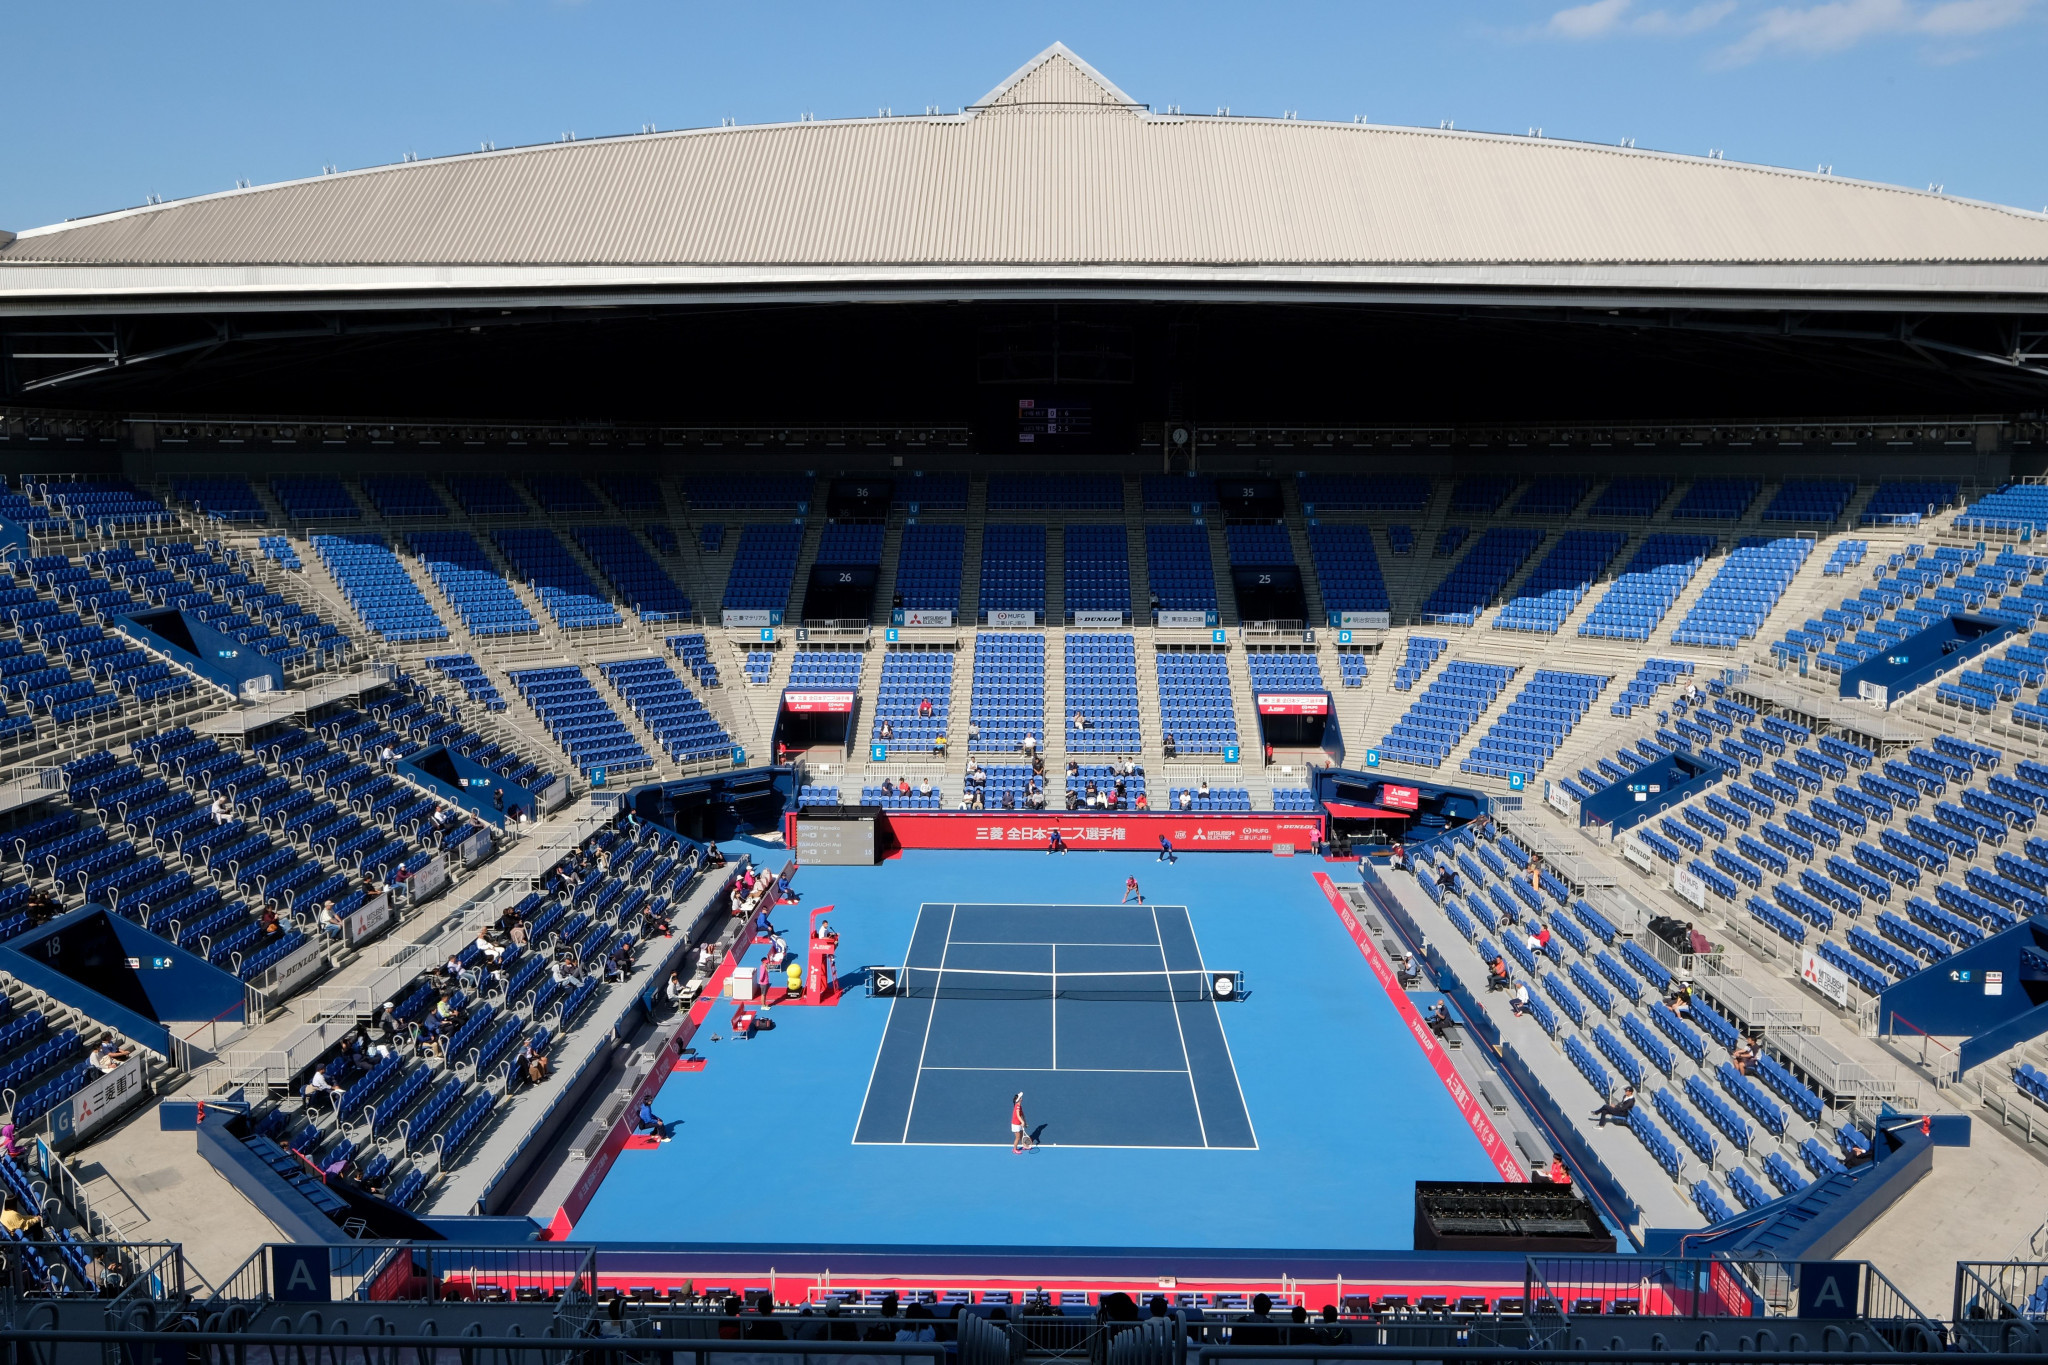 ITF impressed by Ariake Tennis Park after Tokyo 2020 test event